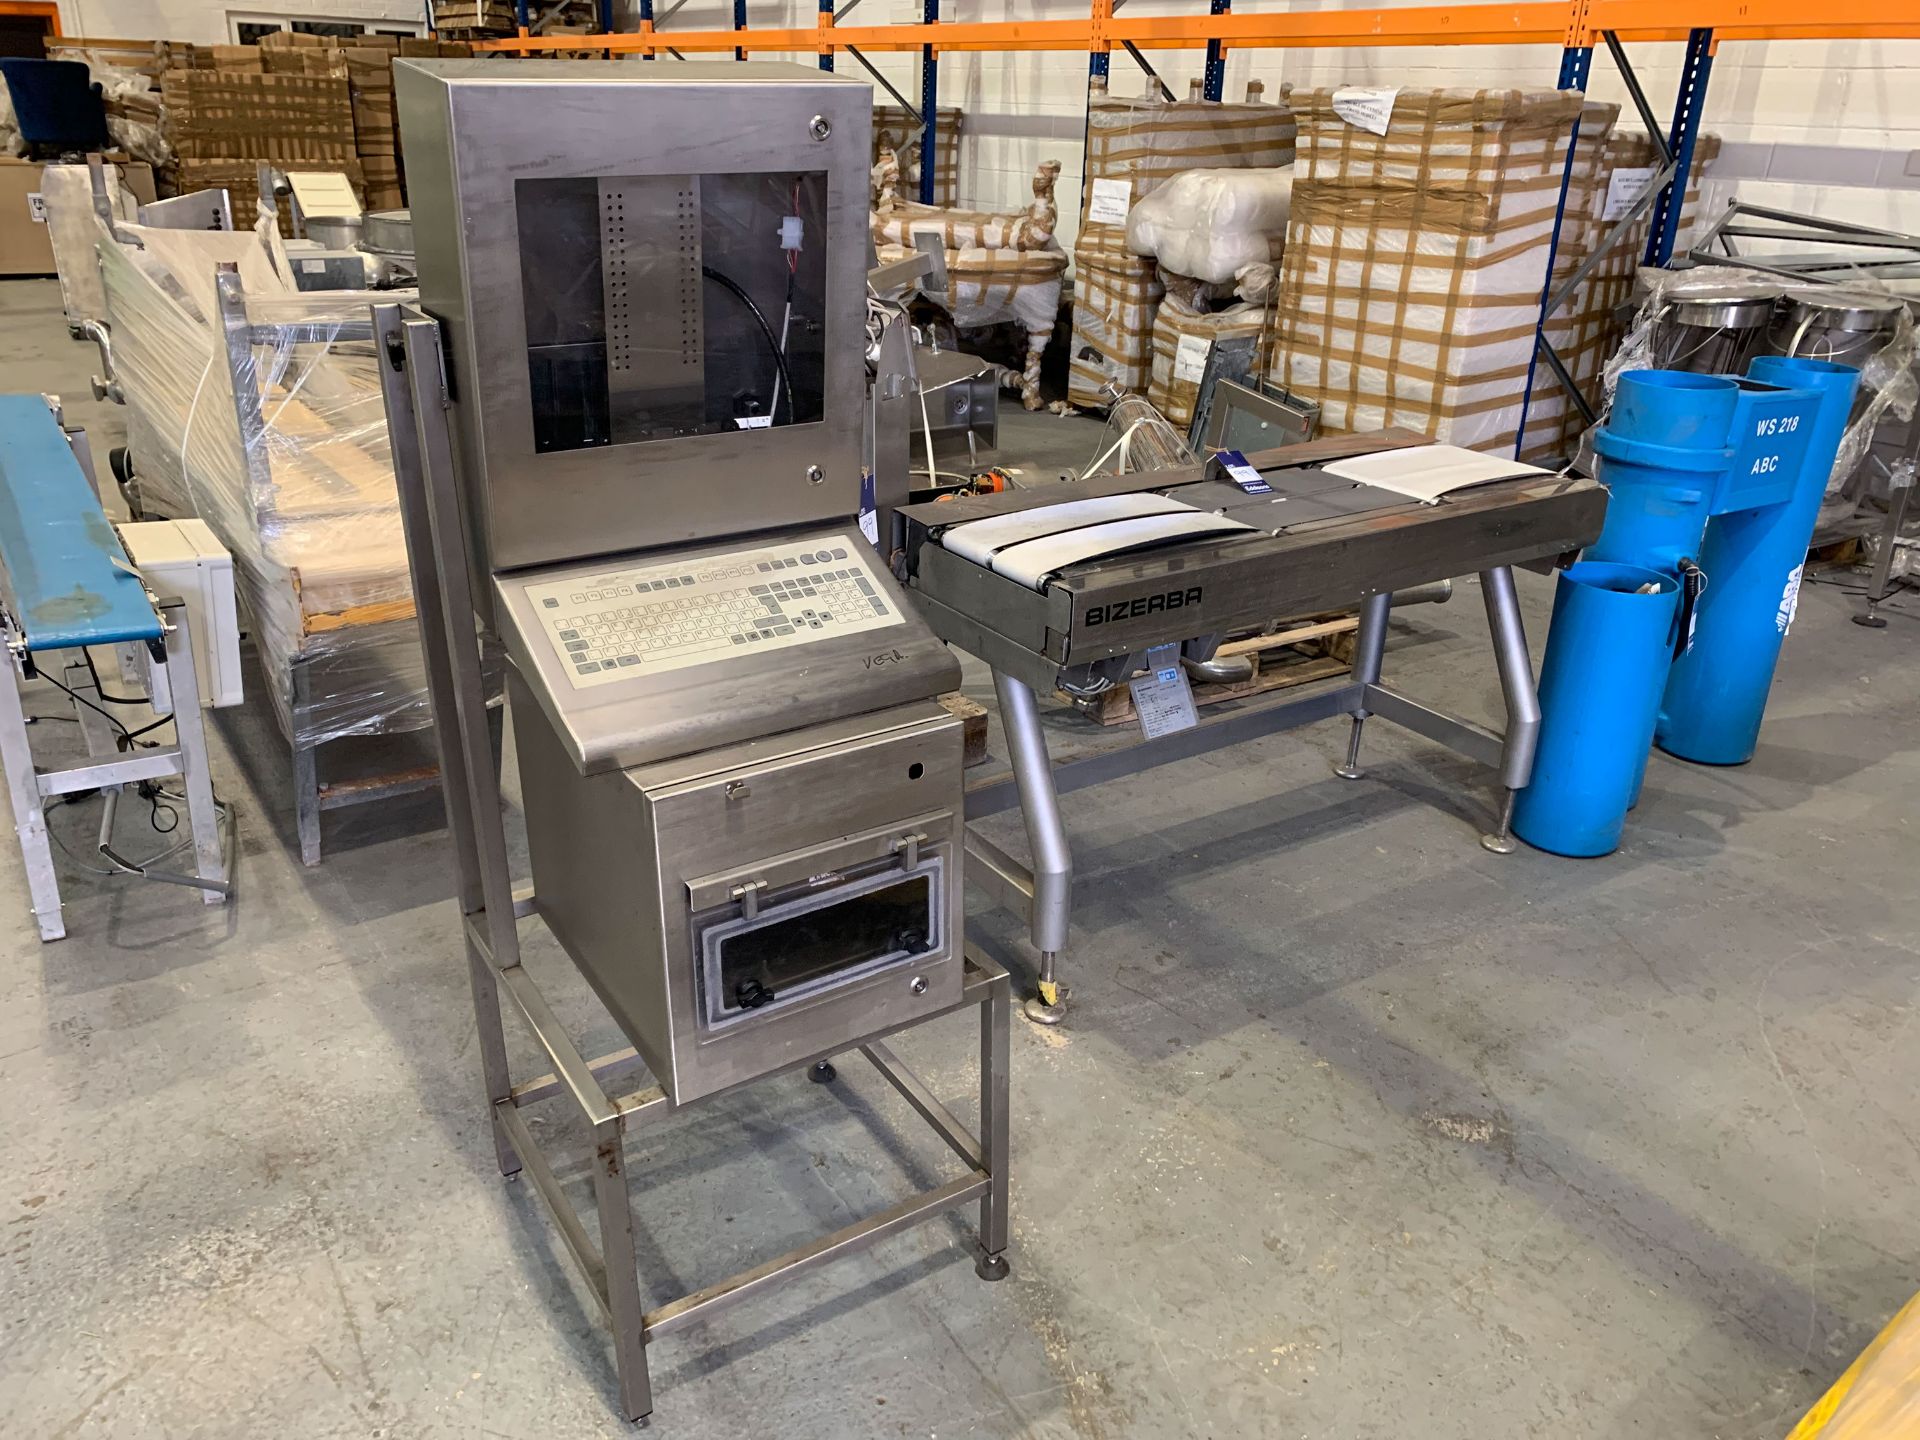 Bizerba Checkweigher Conveyor (no read out) and A Stainless Steel Control Cabinet